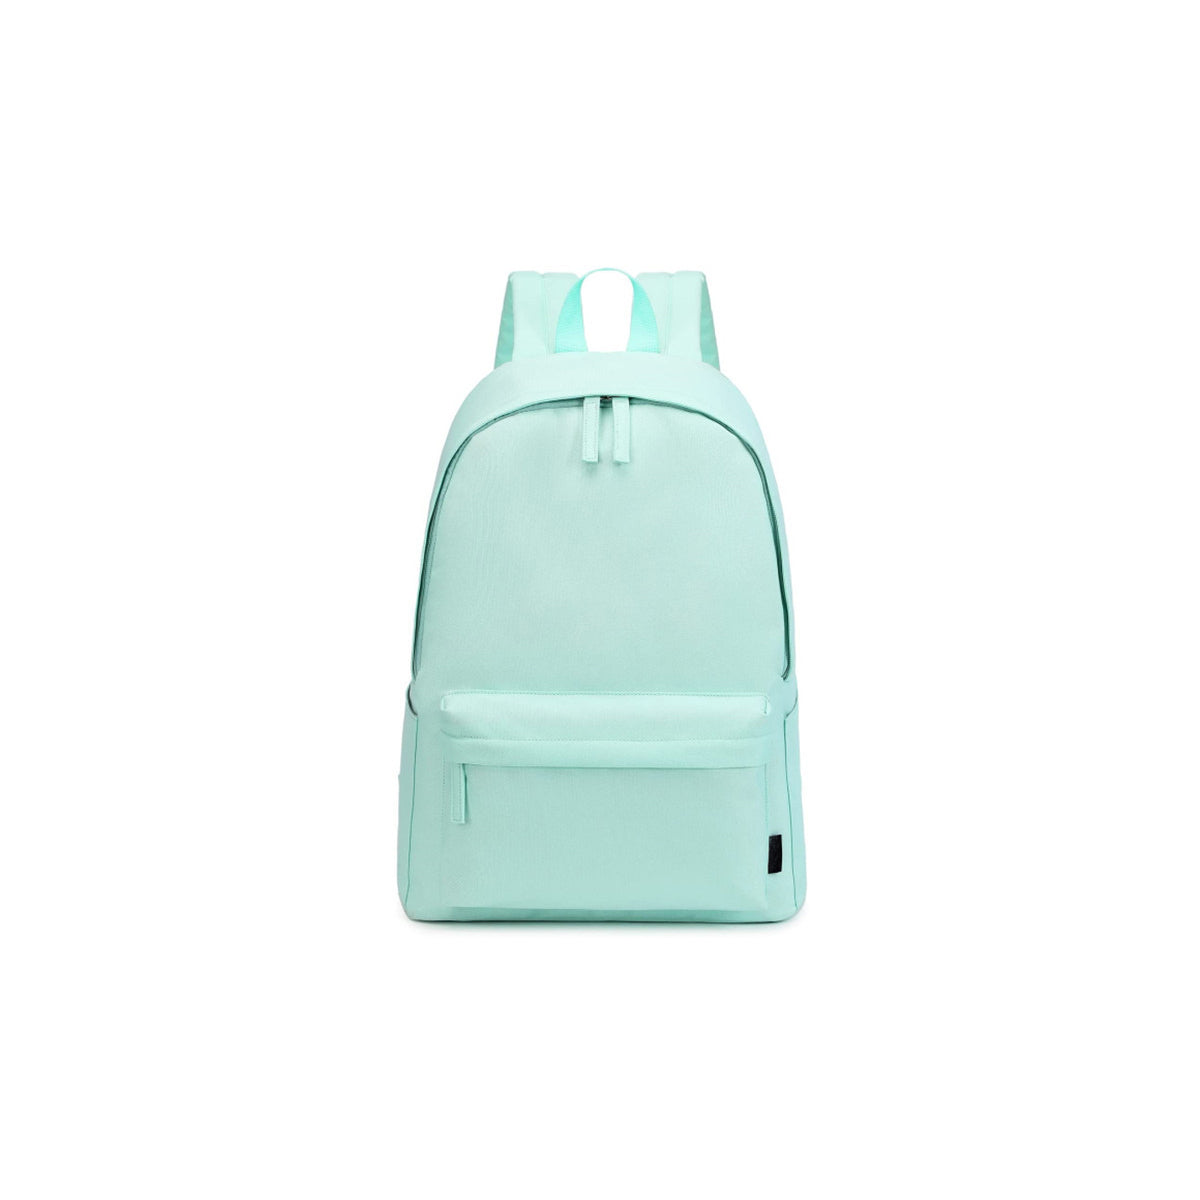 Lightweight Casual Unisex Backpack for School